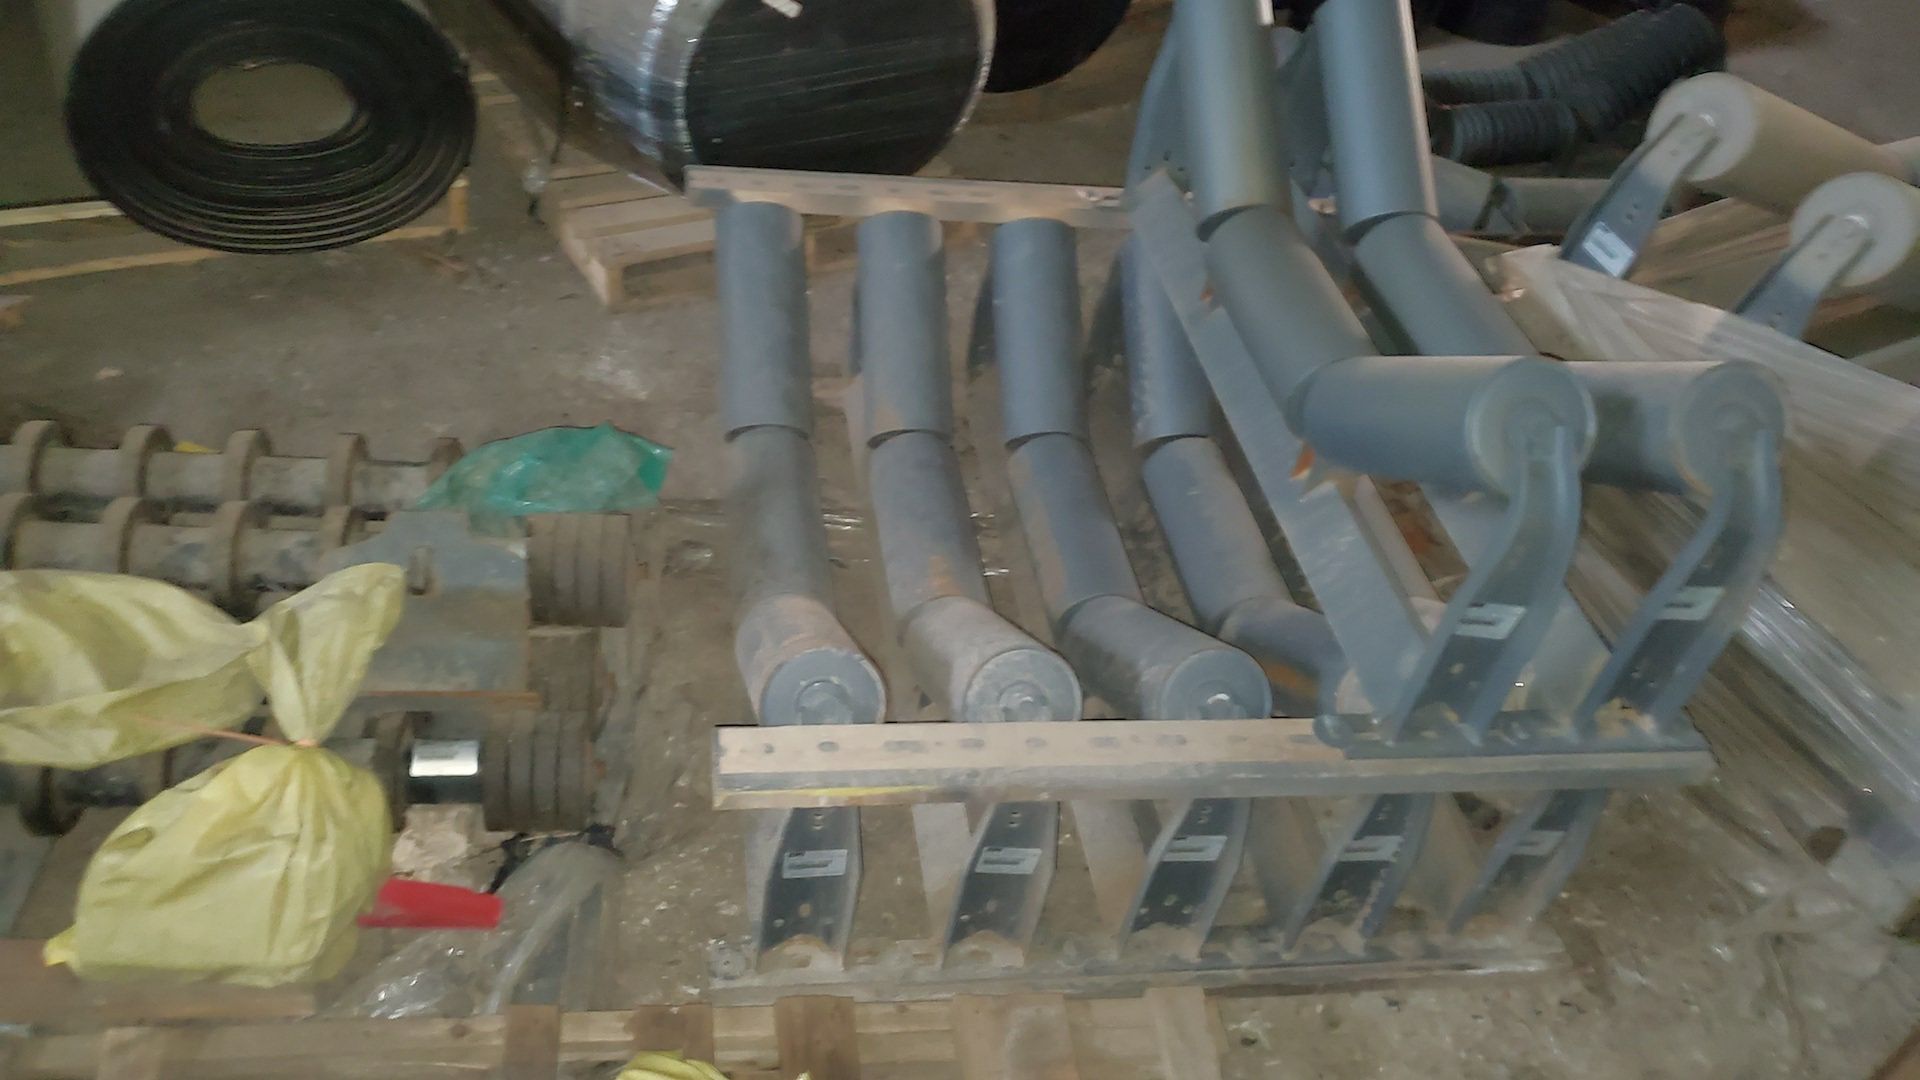 Conveyor Spare Parts (All Pictured, No Belts), Rigging/ Removal Fee: $1,000 - Image 11 of 13